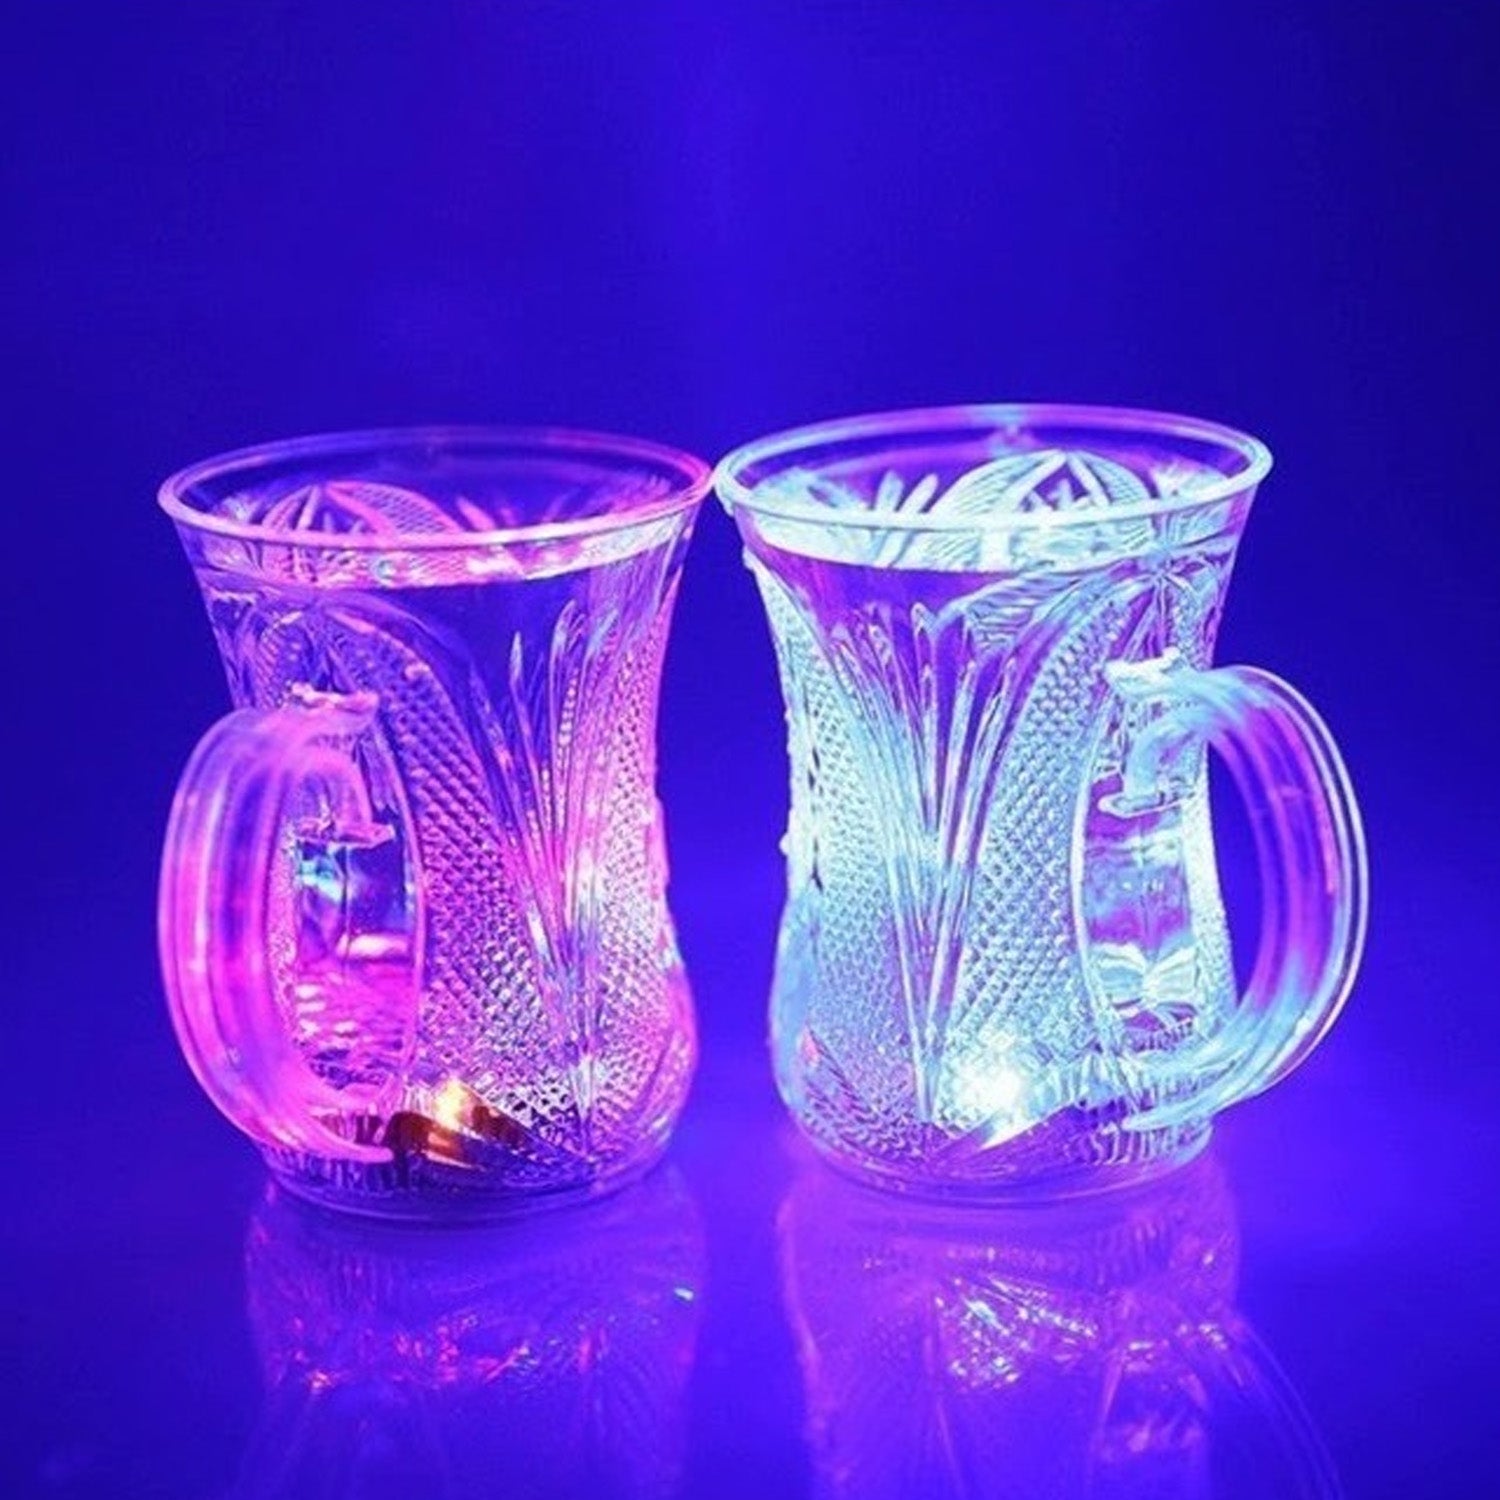 4727 Flashing Cup LED Water Sensor Light up Cup with Handle for Home Kitchen Fun Luminous Water Cup, Party / Birthday / Nightclub / Christmas / Disco Entertainment Cup (2 Pcs Set)